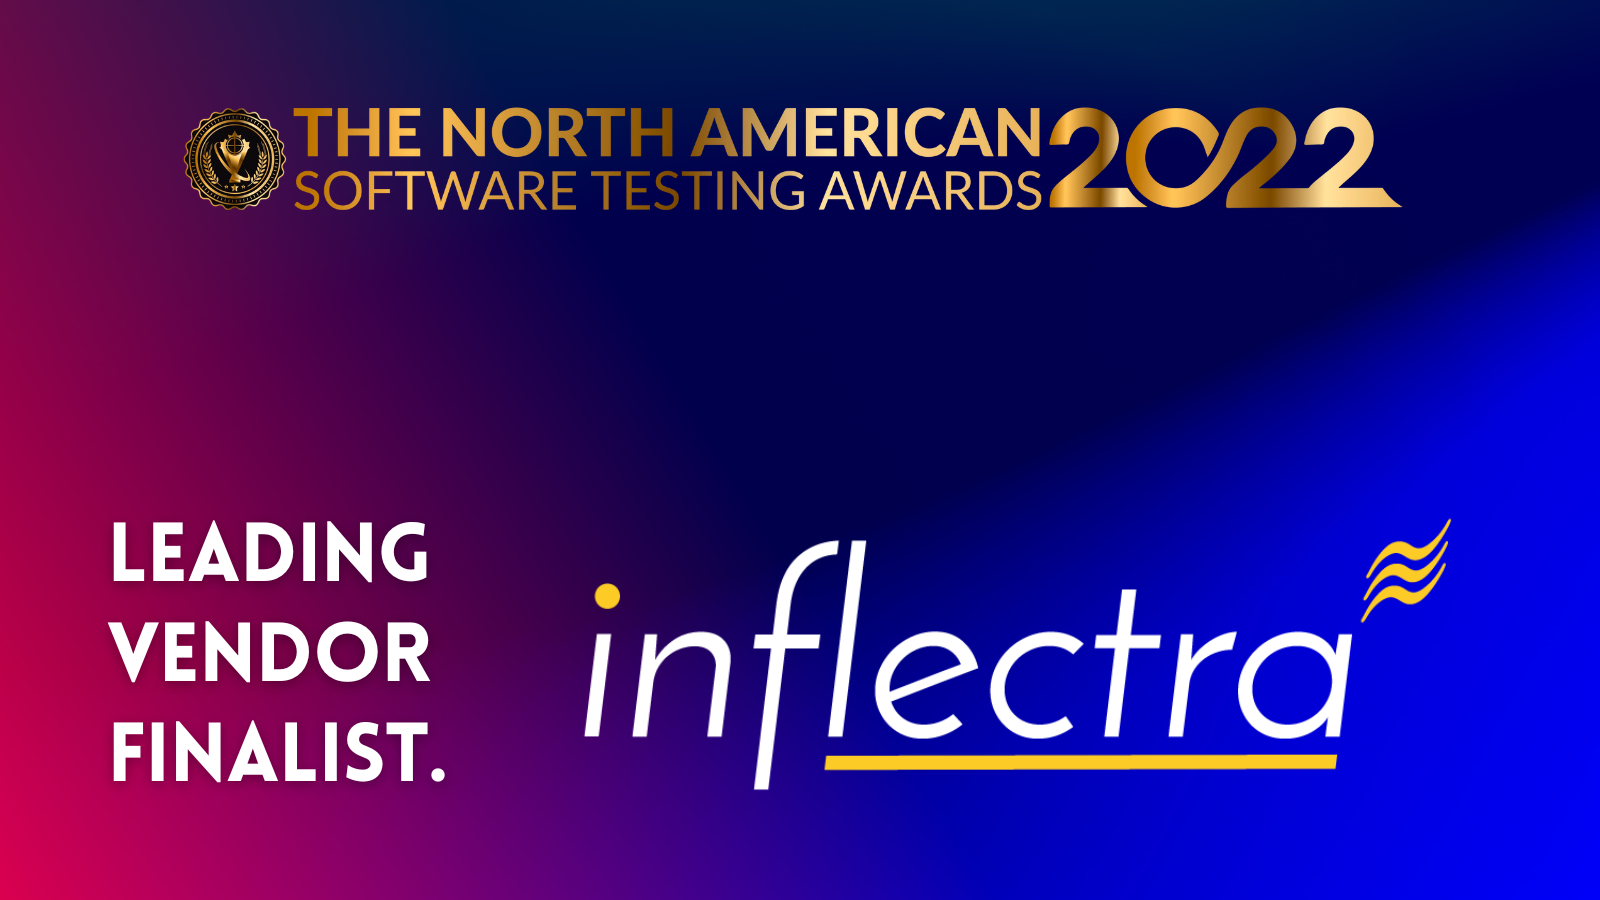 inflectra-finalist-the-north-american-software-testing-awards-2022-image